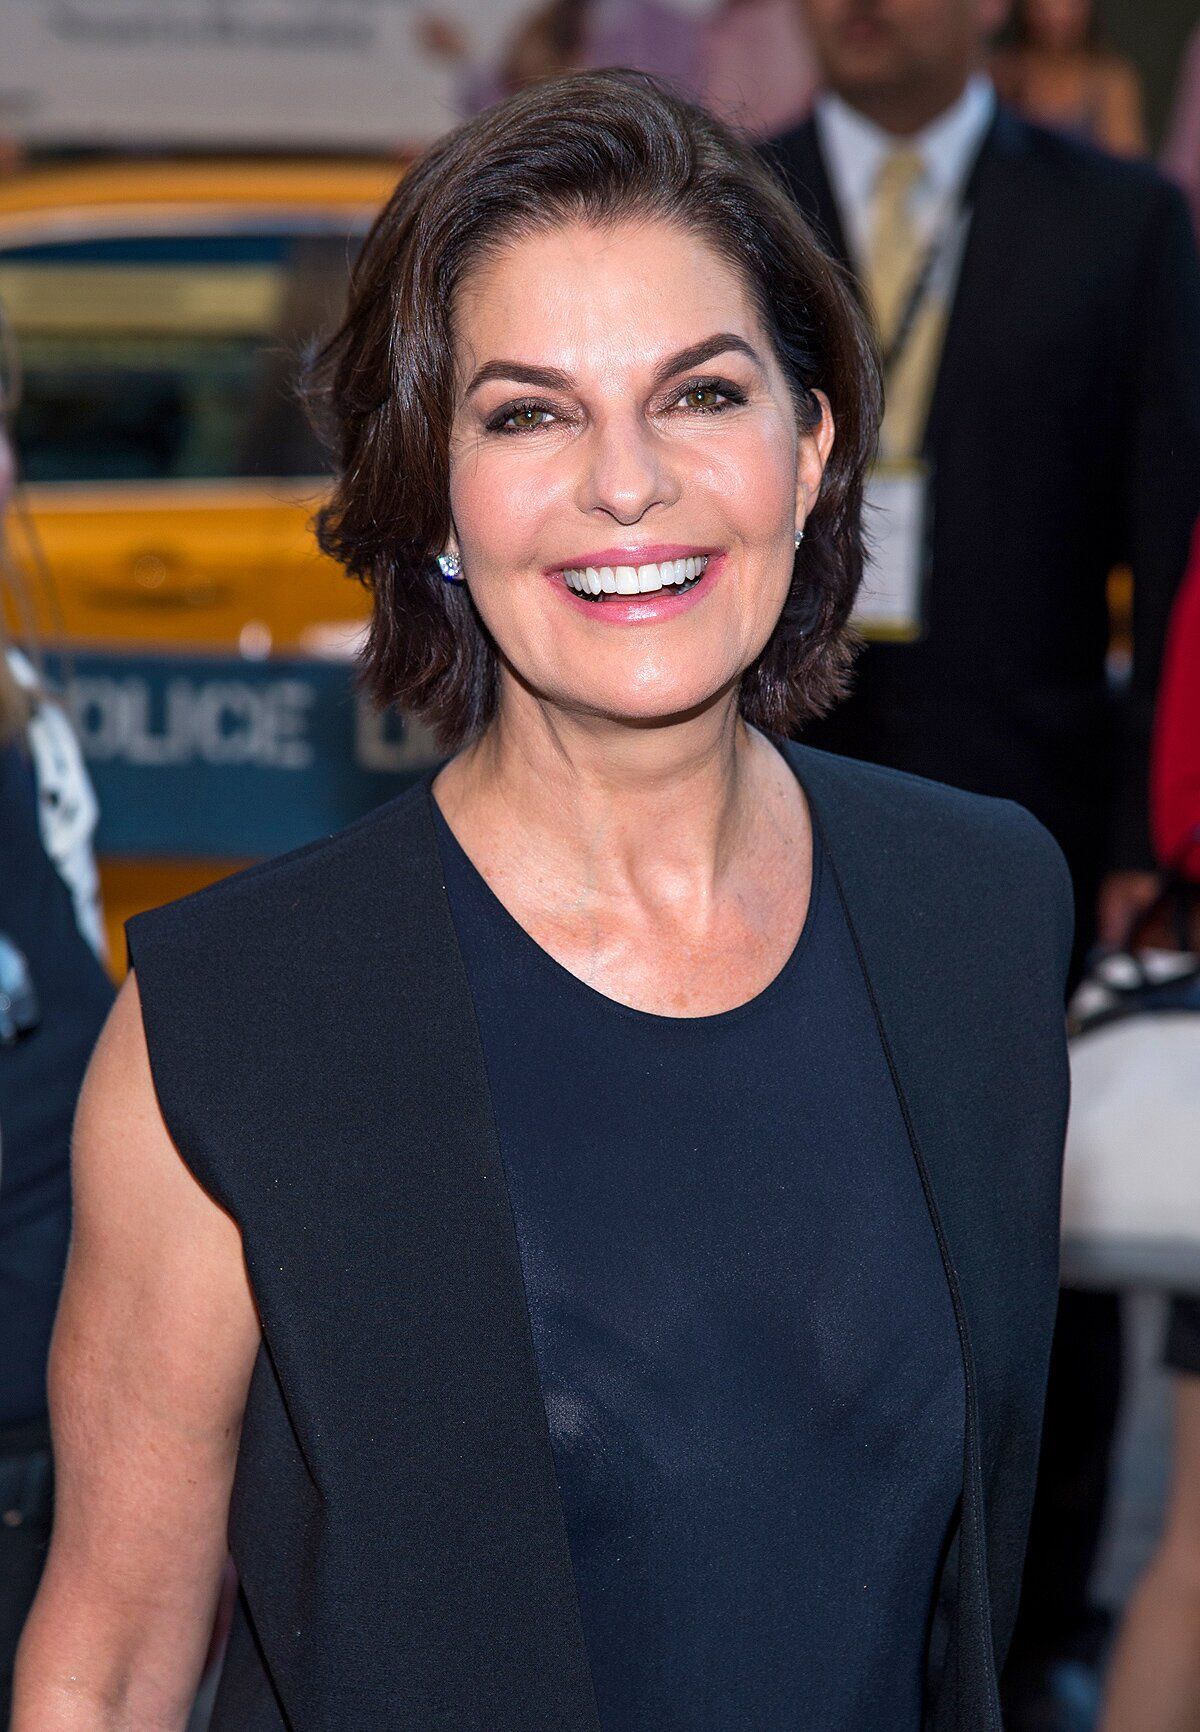 Sela Ward elected president in 'Independence Day 2' .